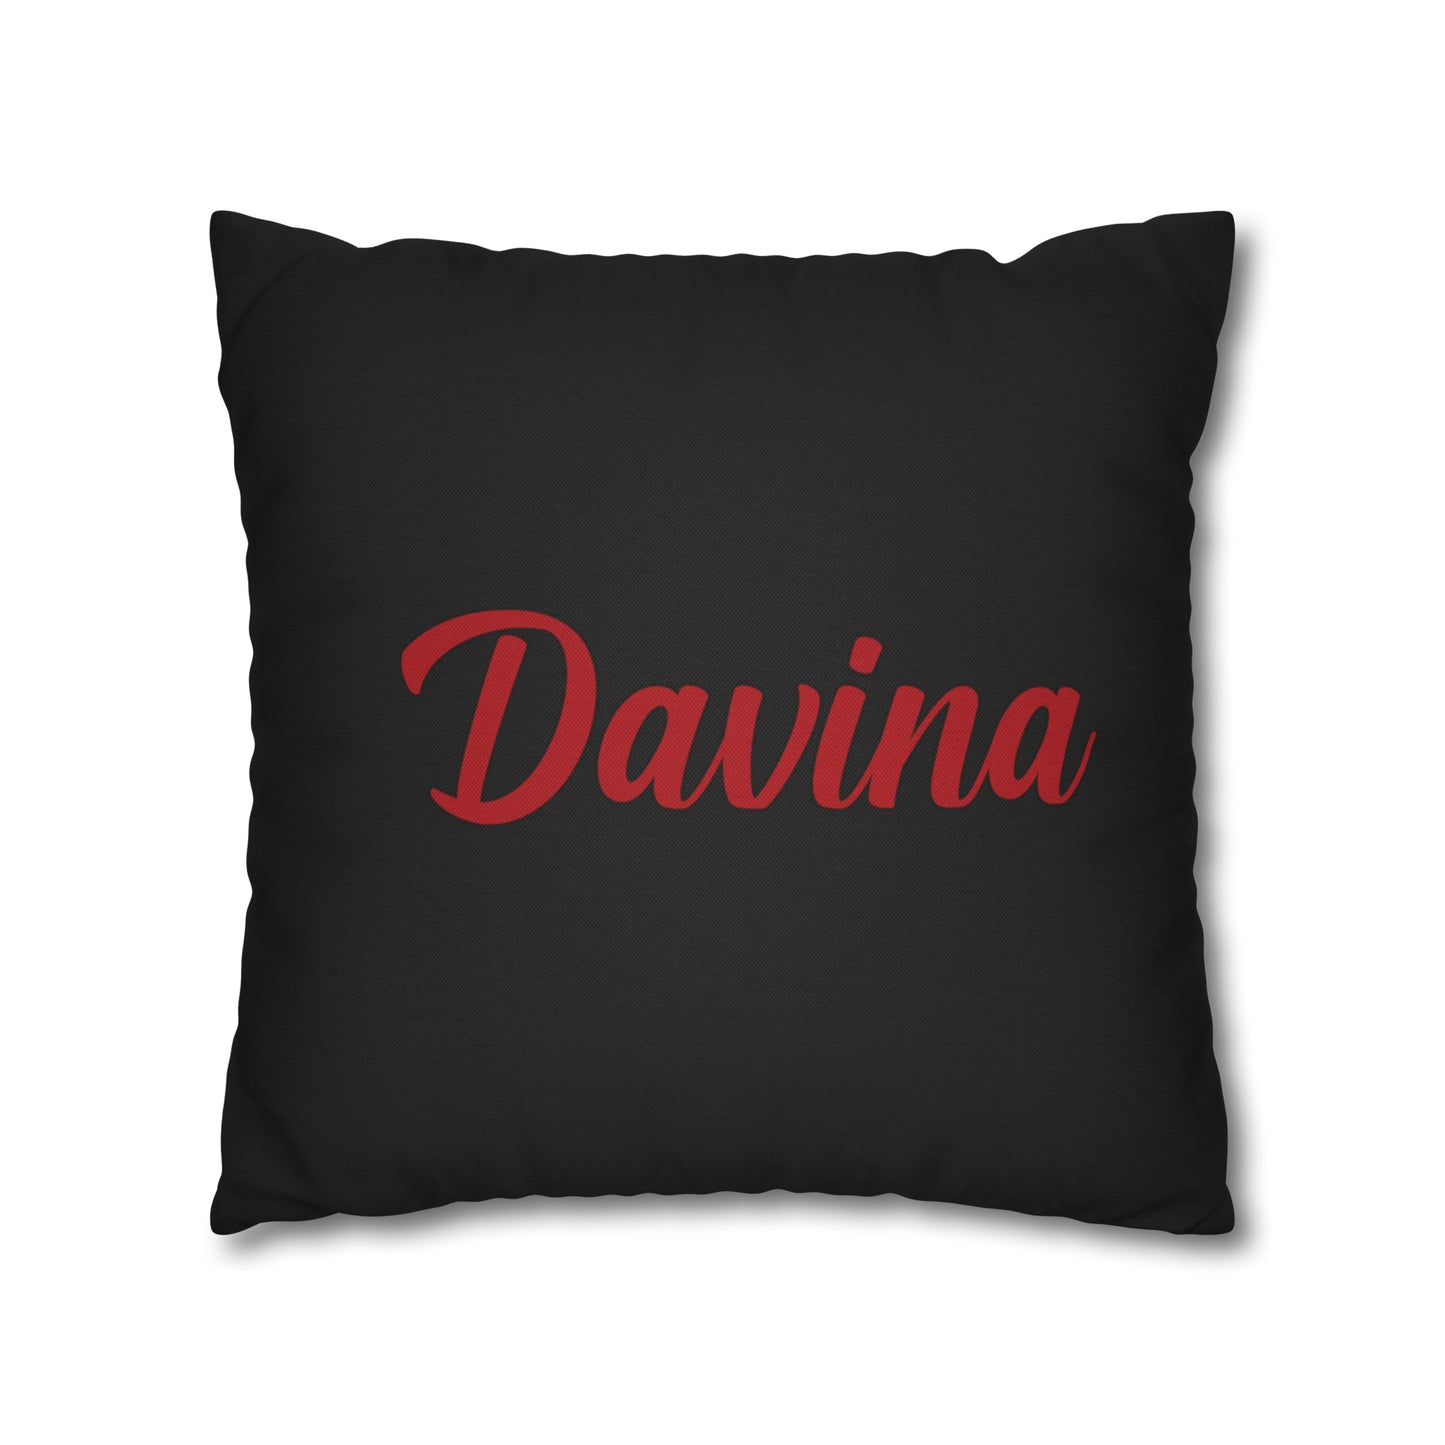 DST Understood the Assignment Pillow Case